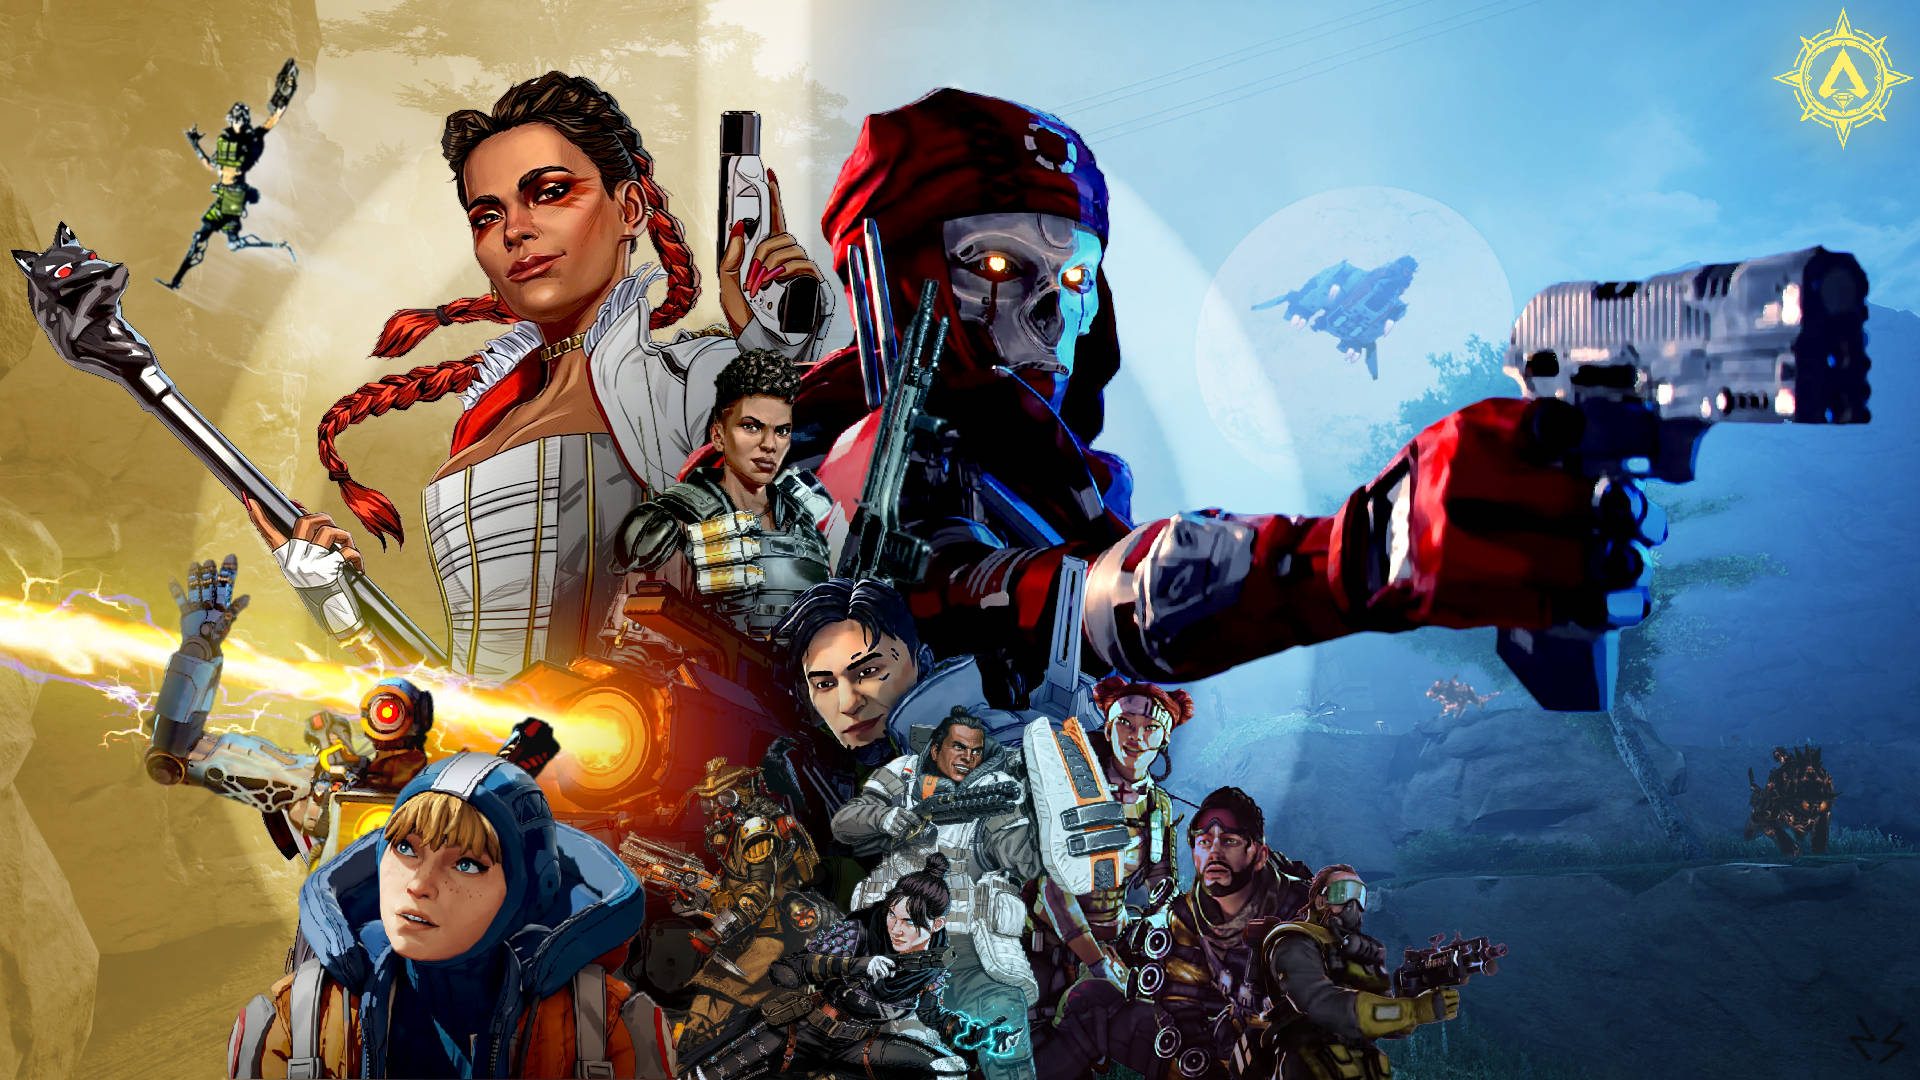 Action-packed out of this world excitement with Cool Apex Legends Wallpaper